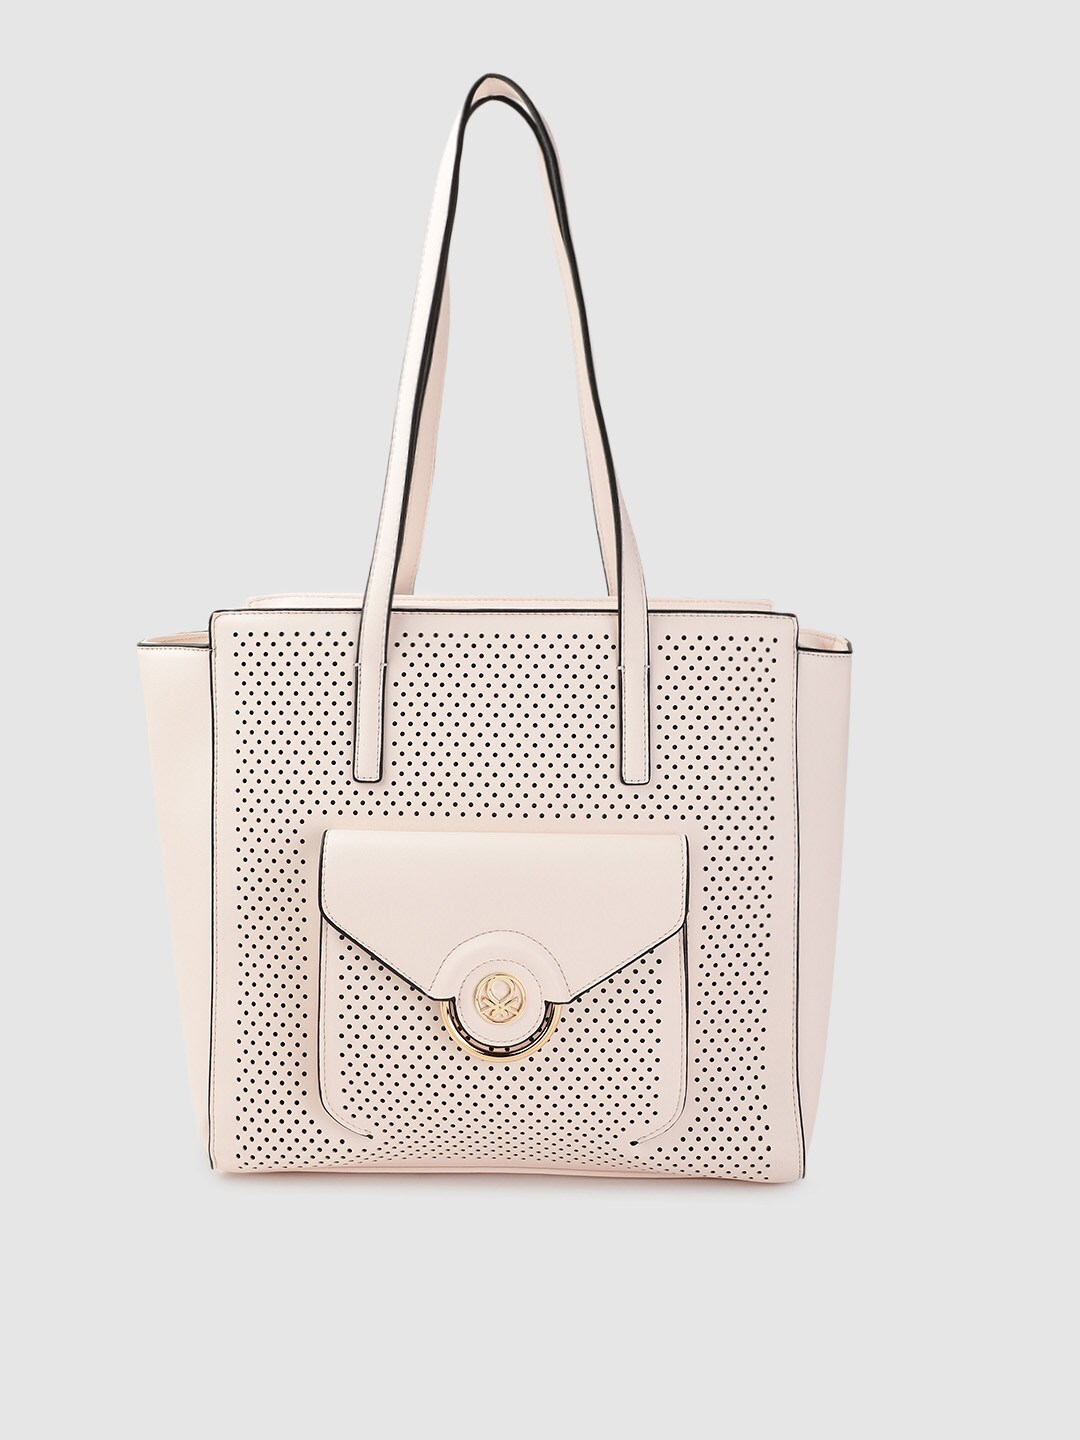 United Colors of Benetton Light Pink Laser Cut Swagger Shoulder Bag Price in India